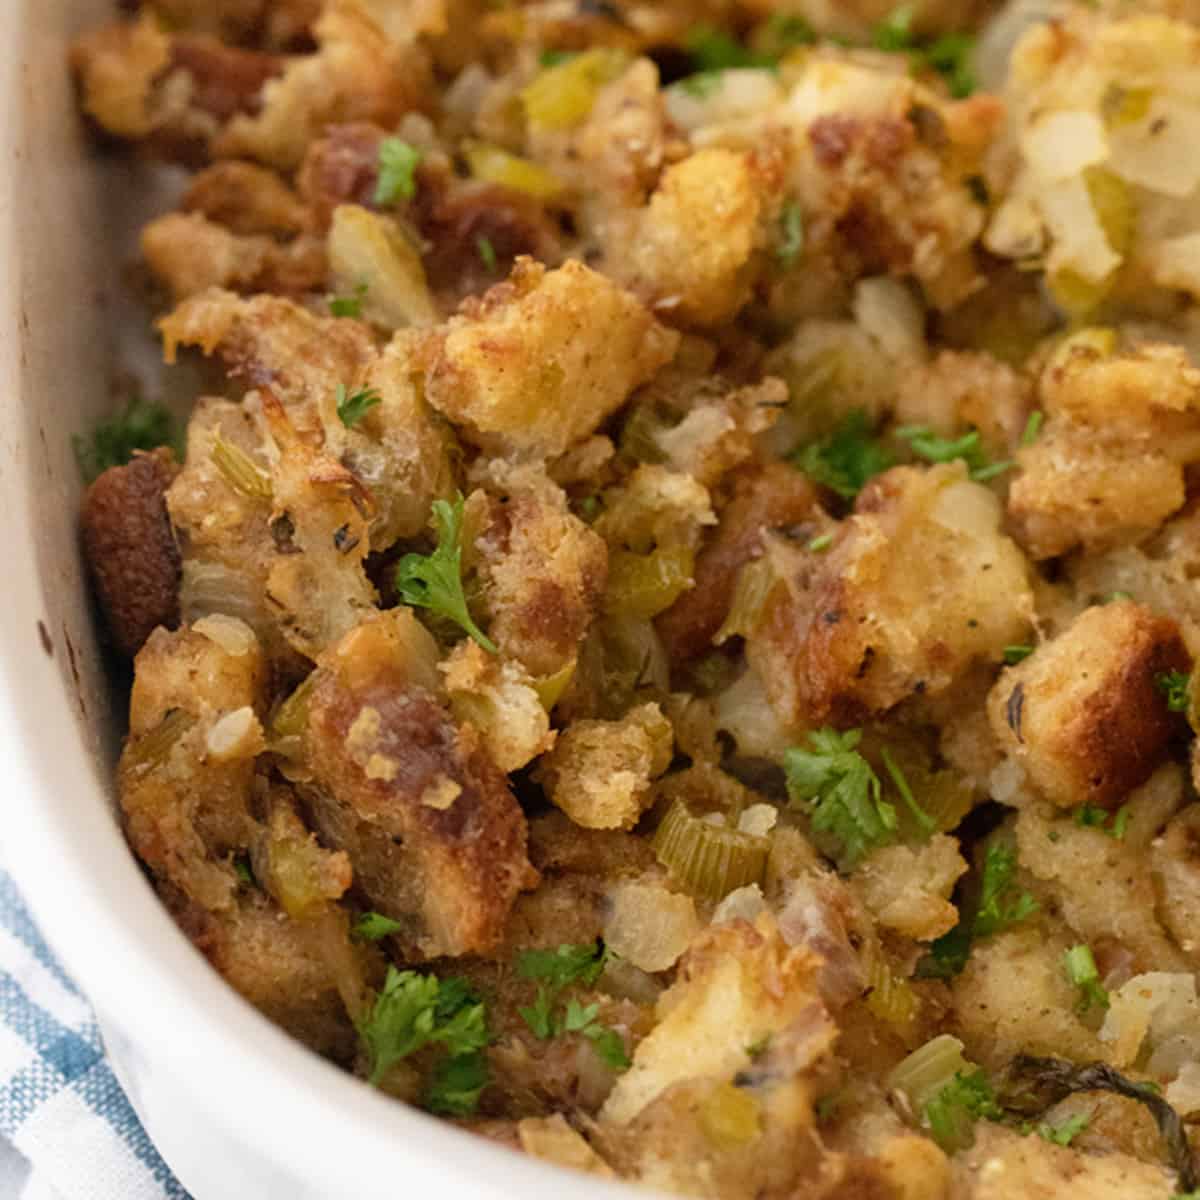 Thanksgiving stuffing recipe, stuffing recipe from scratch